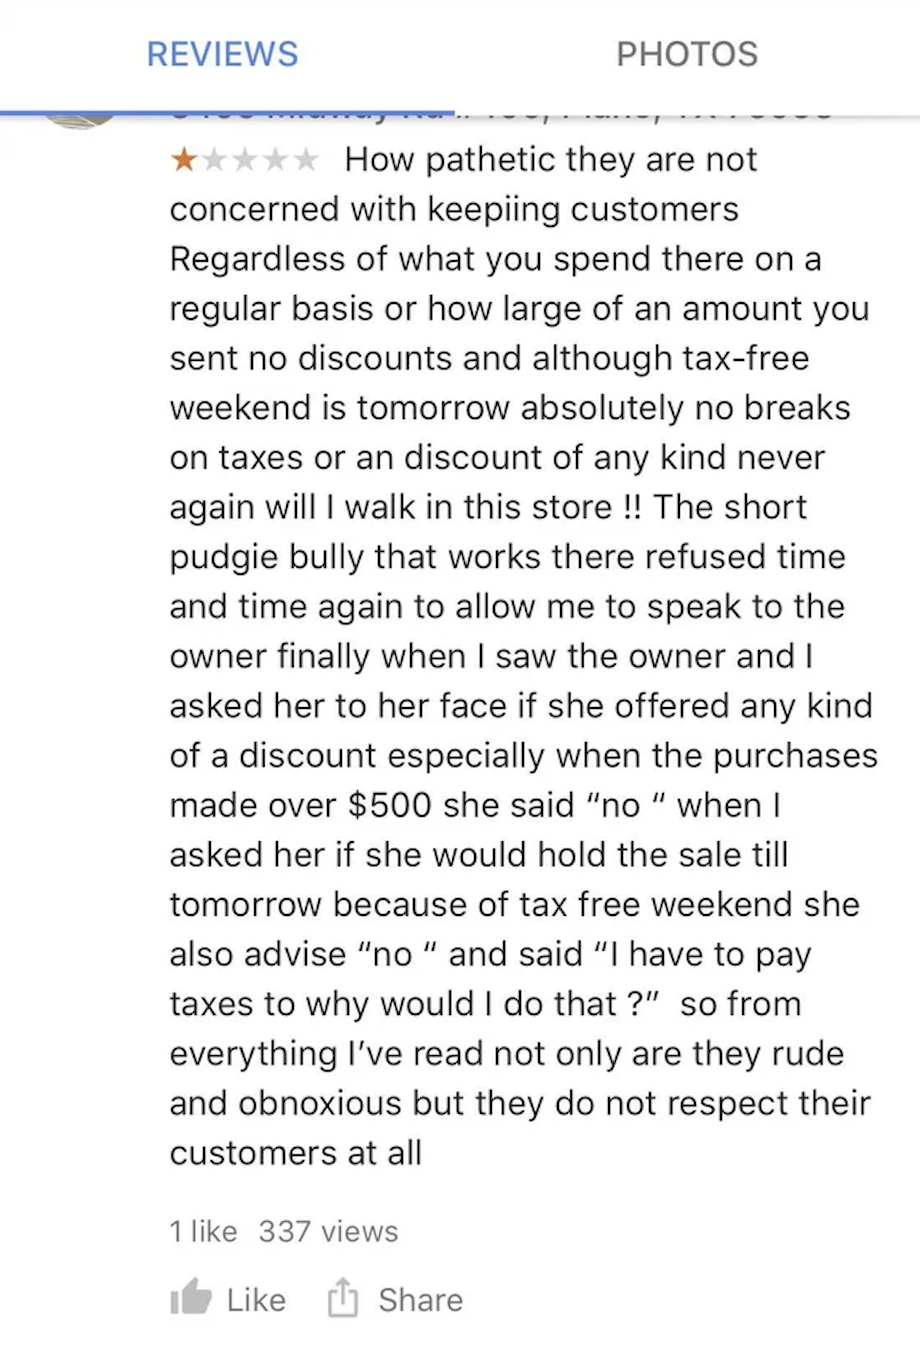 &quot;but they do not respect their customers at all&quot;